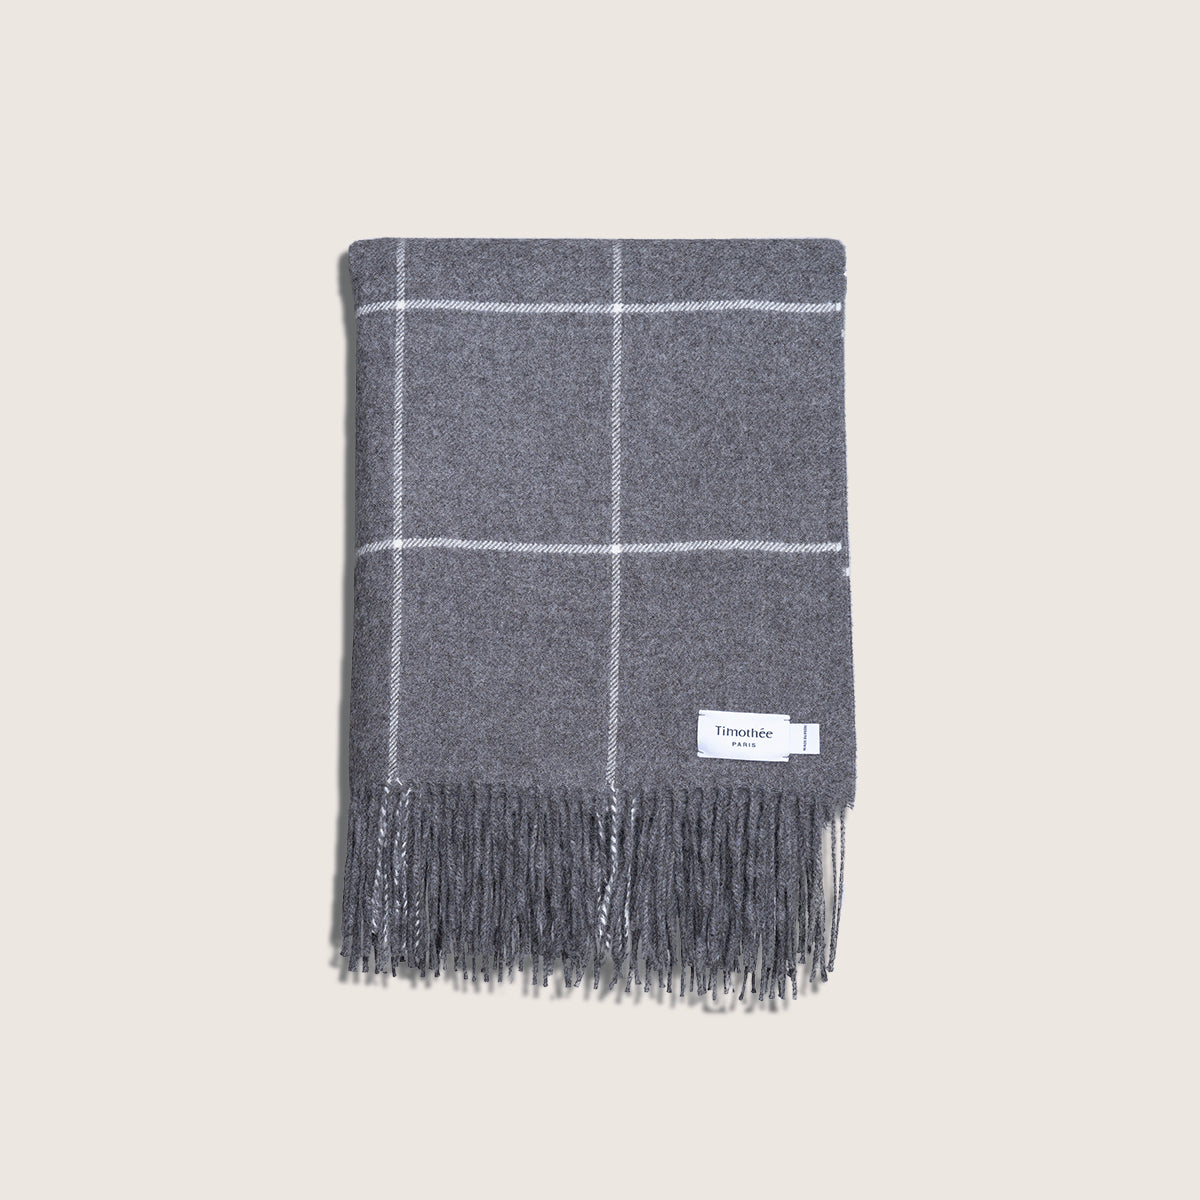 dark grey alpaca blanket by french-lifestyle brand timothee paris front view